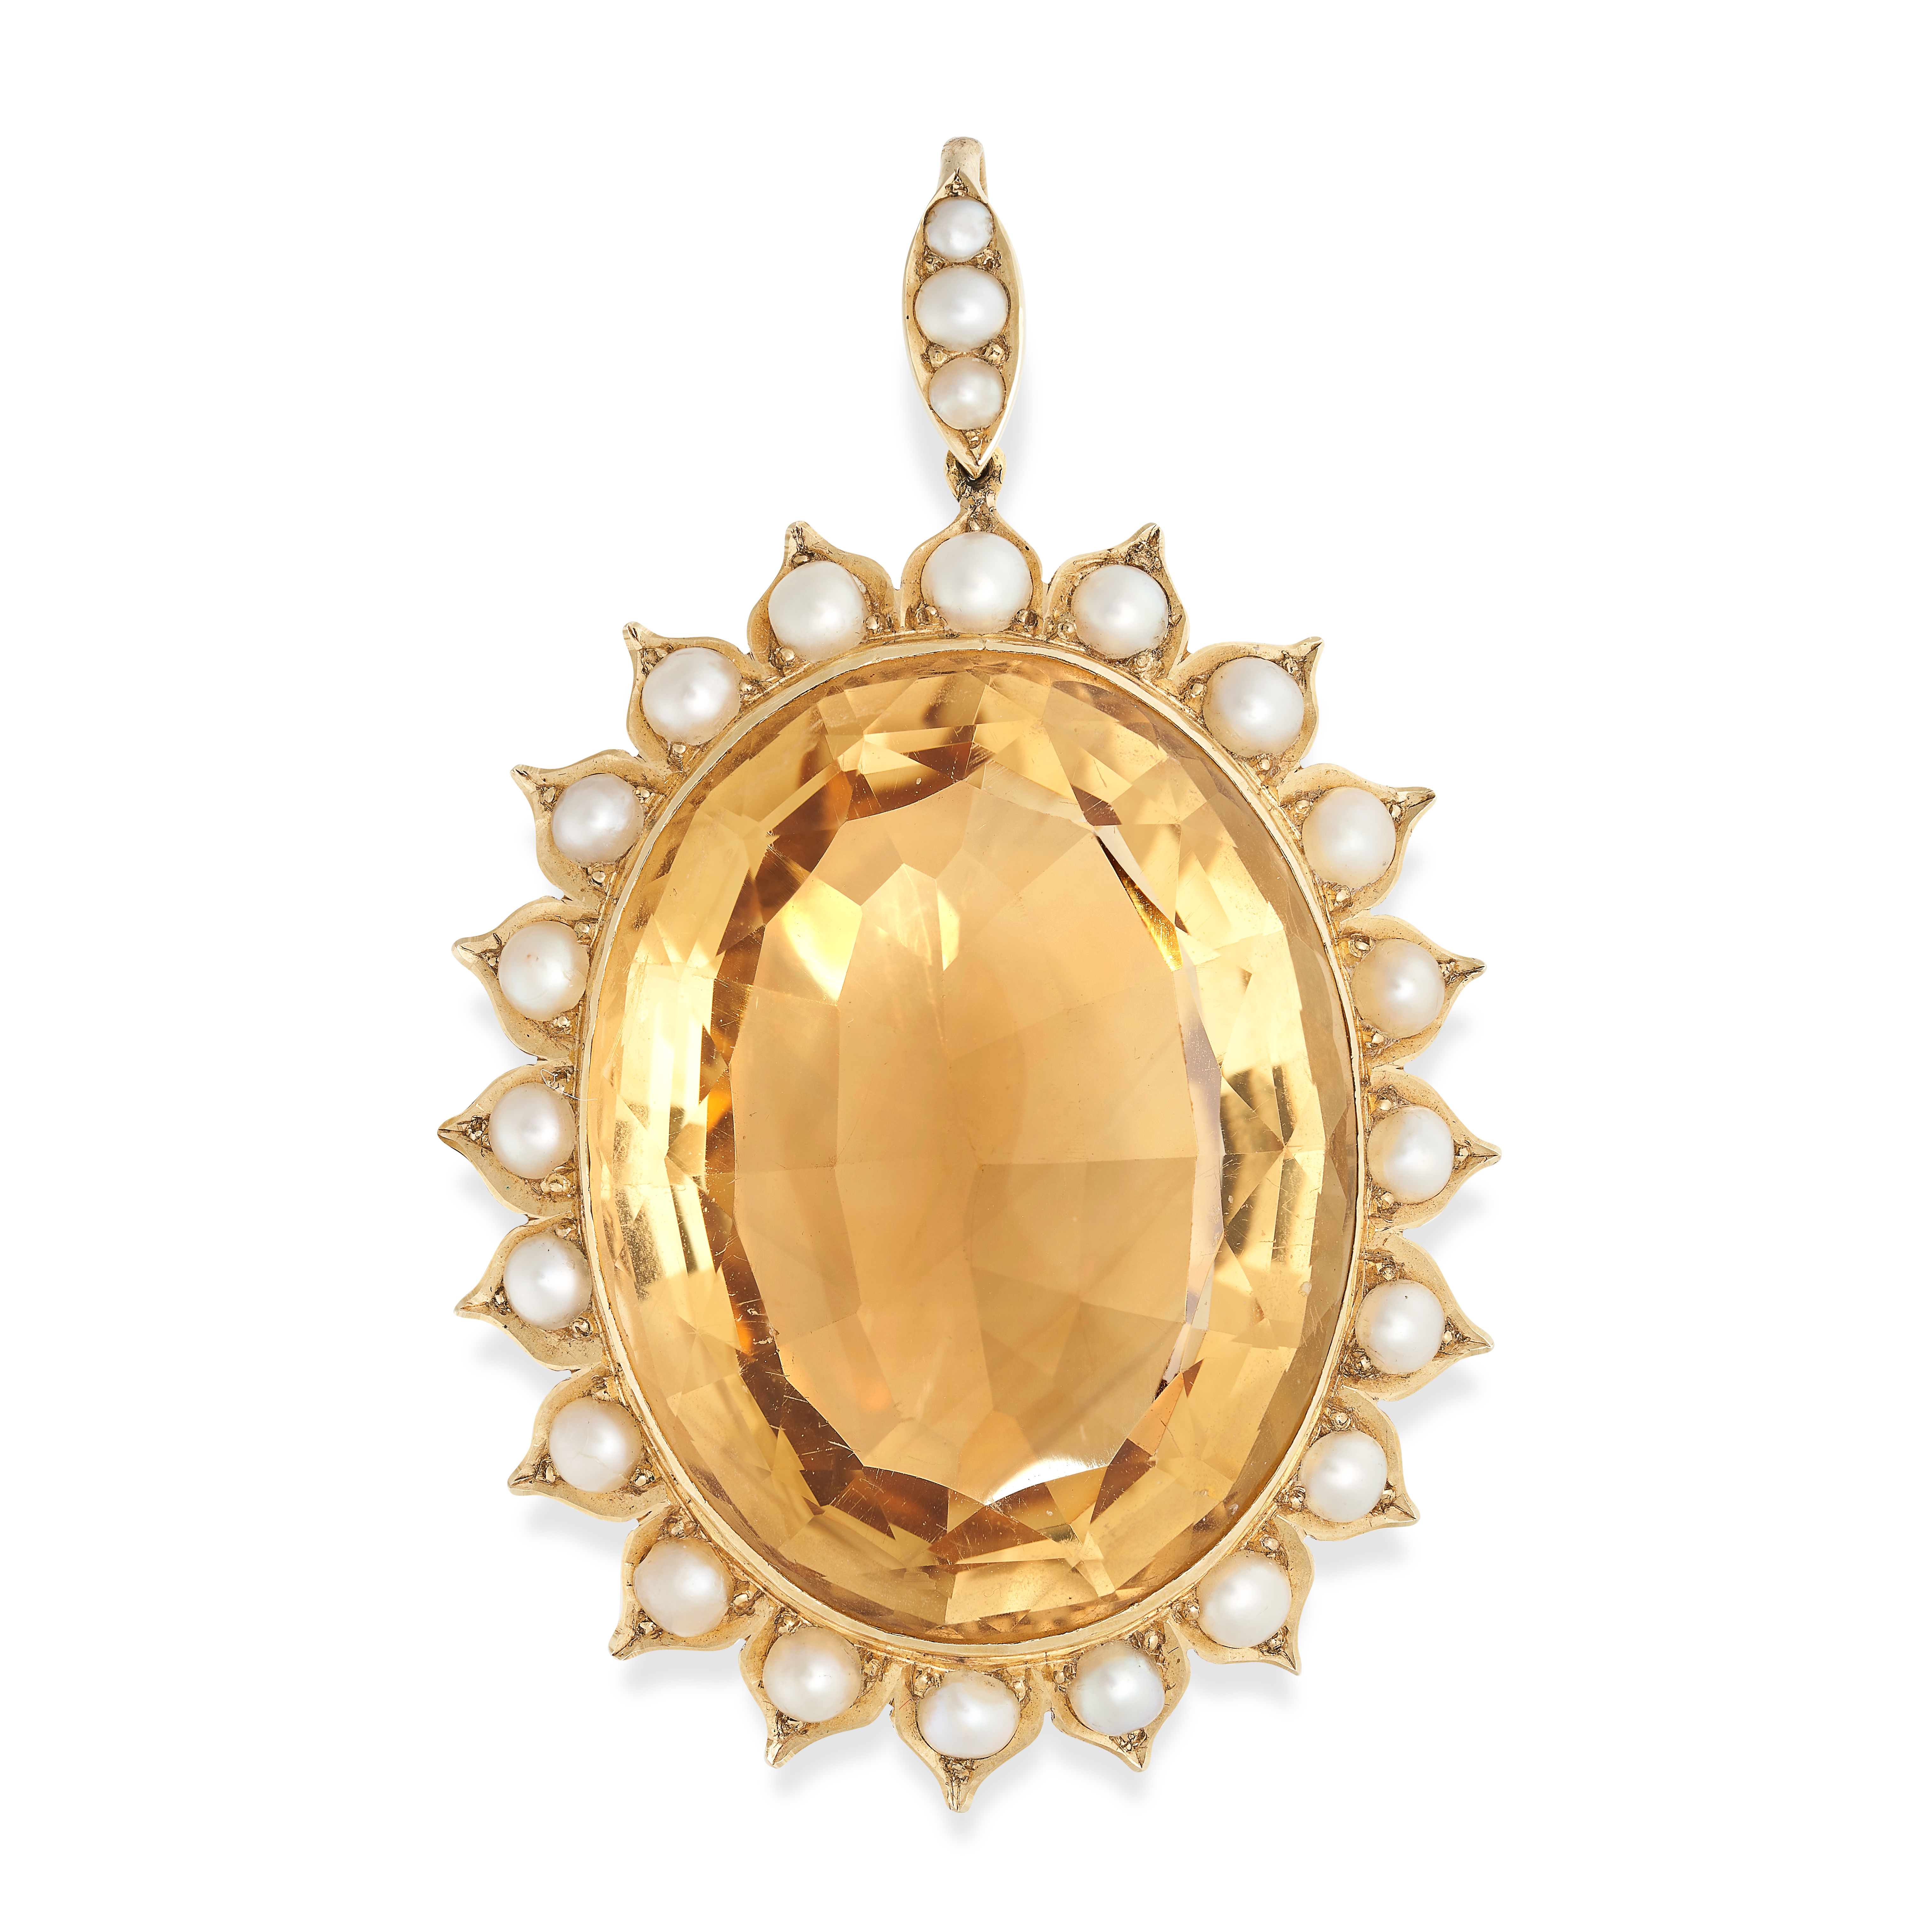 AN ANTIQUE CITRINE AND PEARL PENDANT in 15ct yellow gold, set with a large oval cut citrine in a